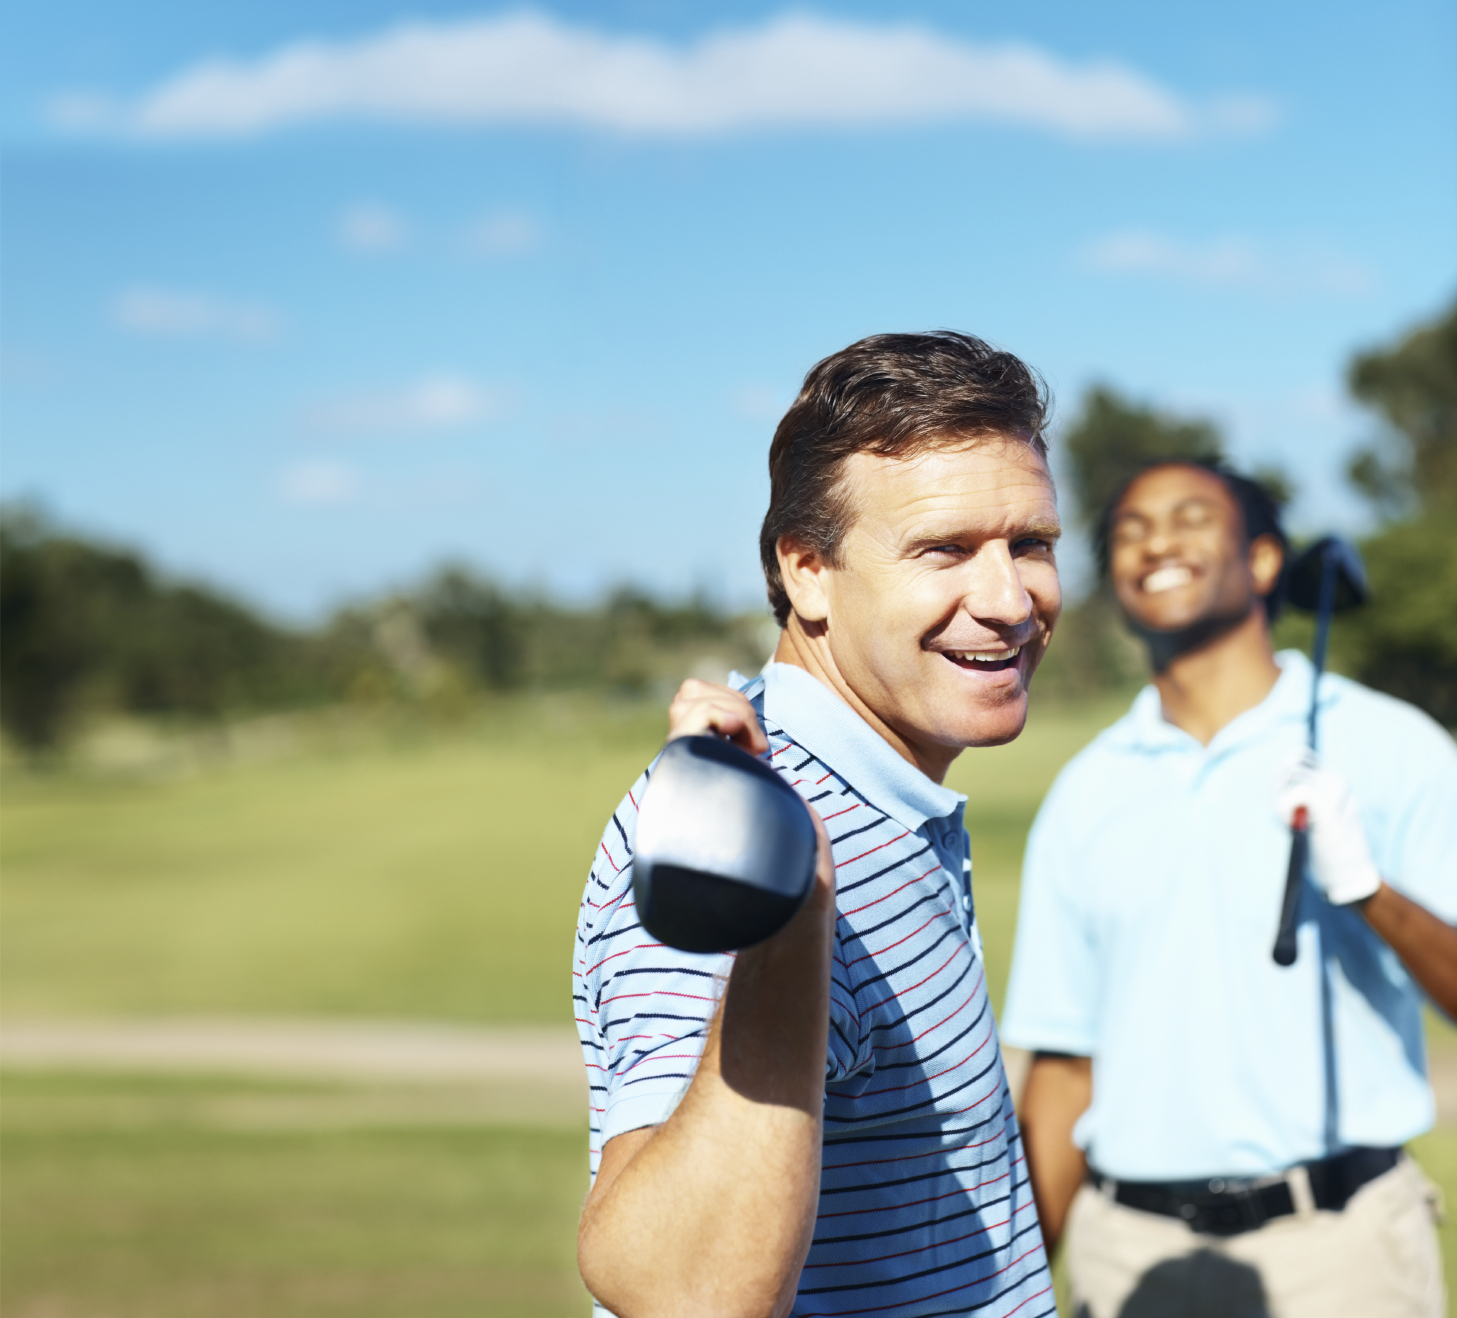 Golf Etiquette Tips for the Private Country Club Course